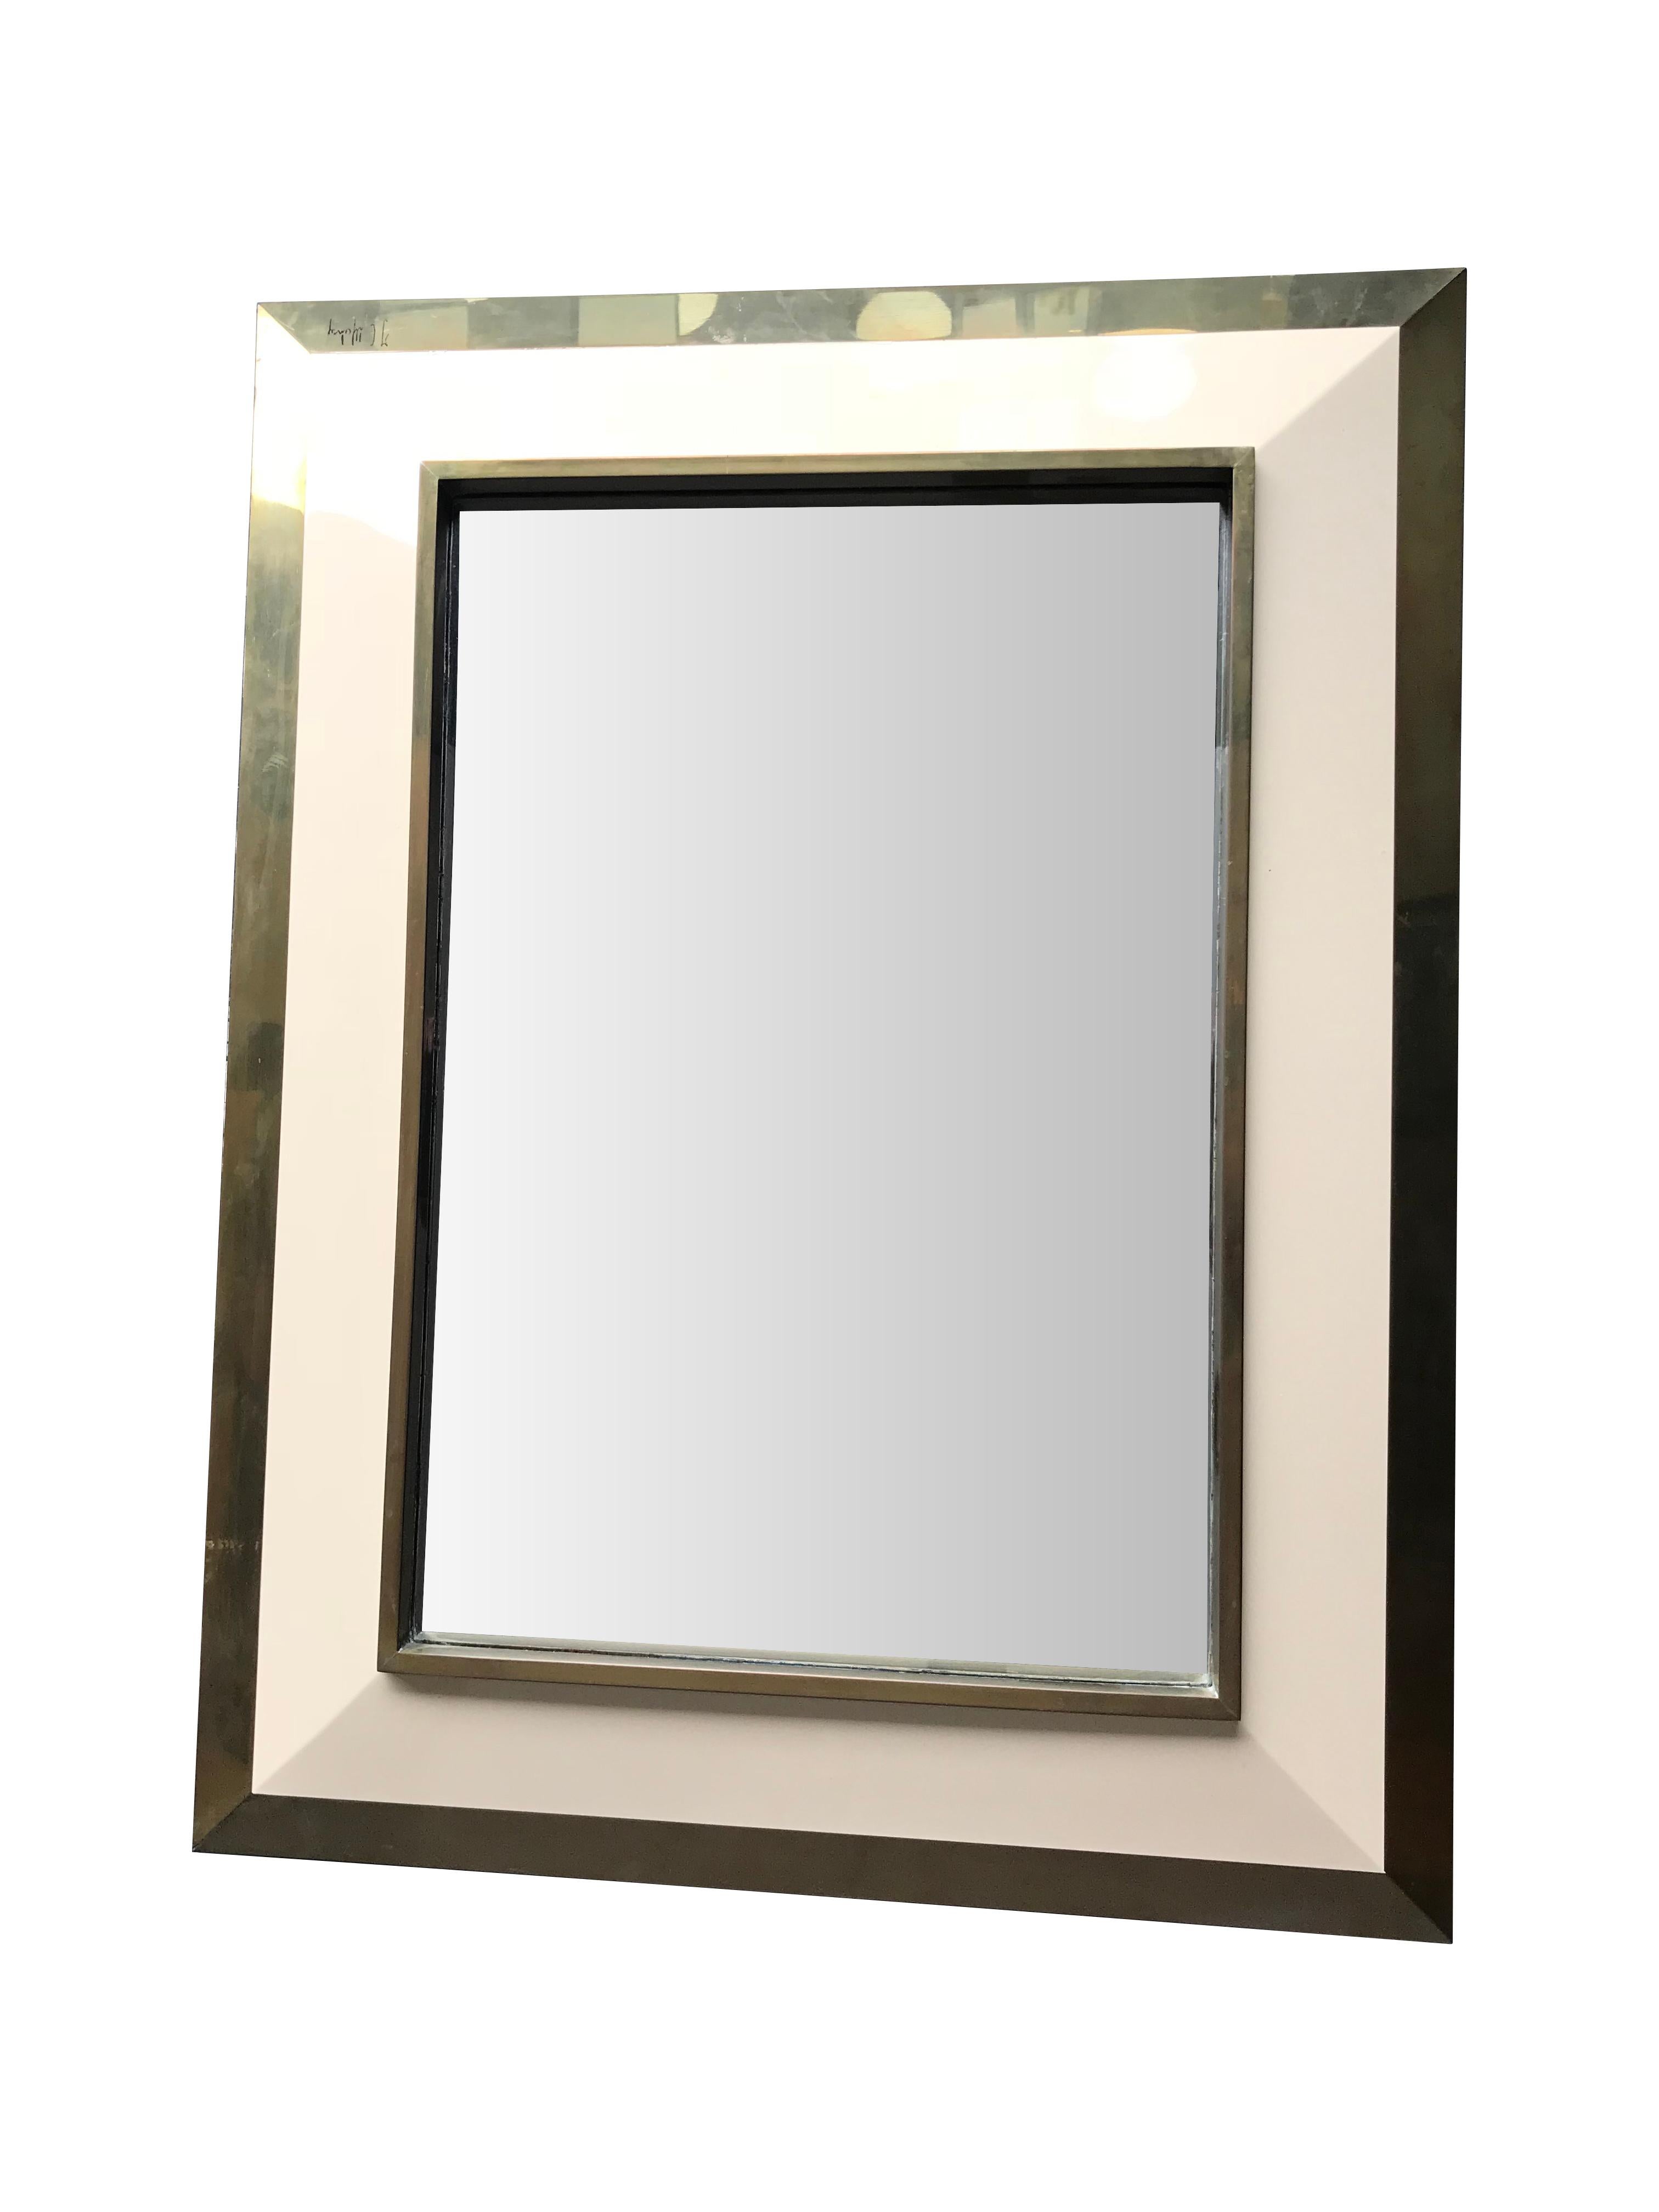 A Jean Claude Mahey mirror with angled raised ivory lacquer and brass convex frame surround, signed on the bottom right hand corner 